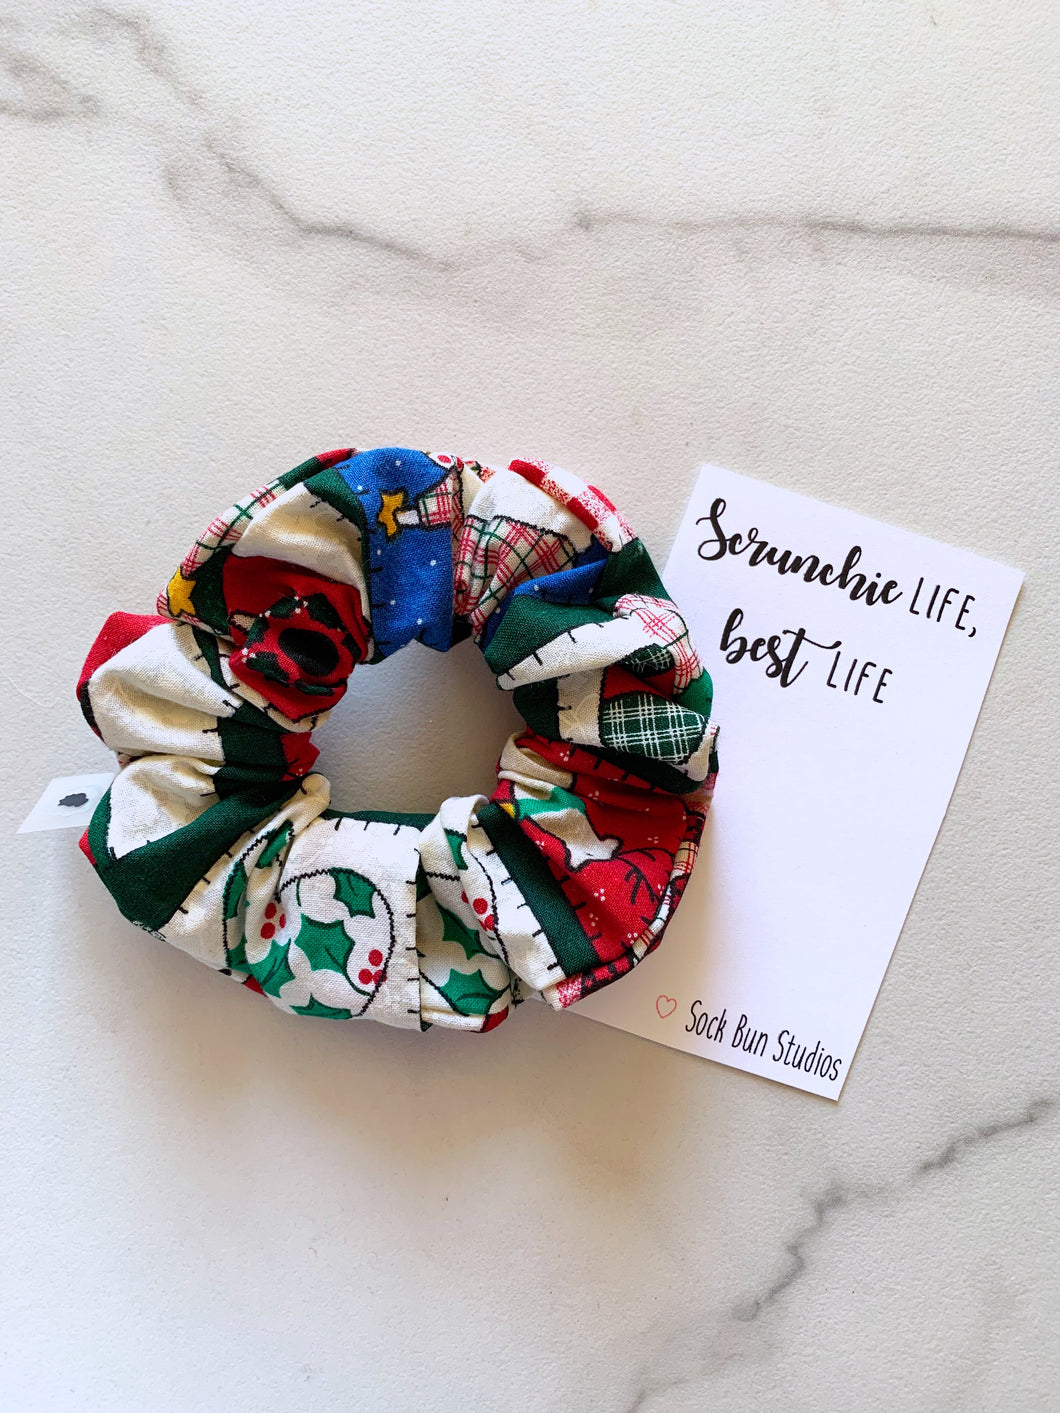 SALE Throwback Heart of Christmas Scrunchie